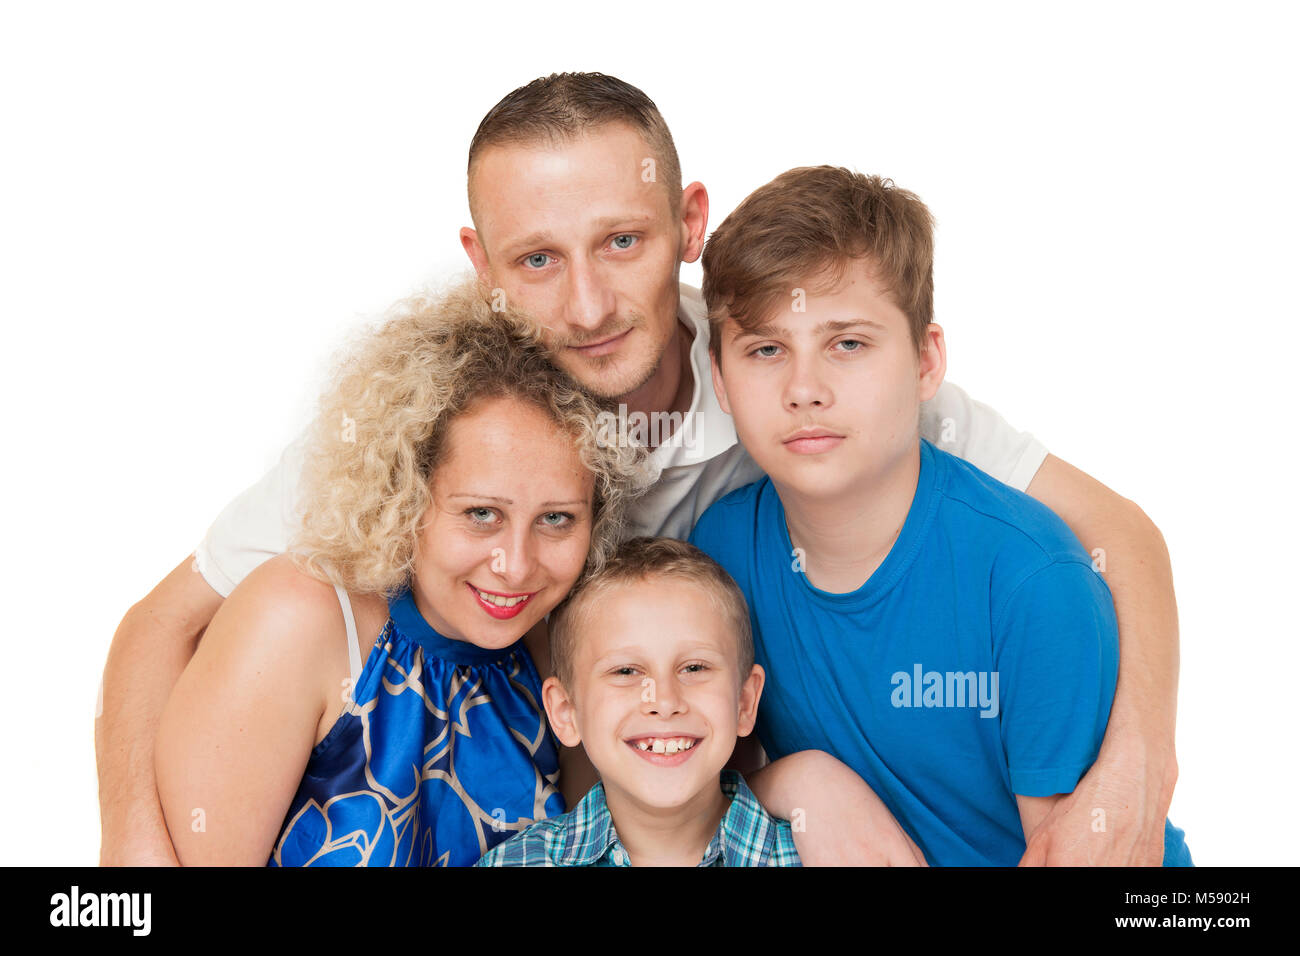 Head and shoulders portraits of a young family with father, mother and two boys against white background. Father puts his arms around his family. Stock Photo